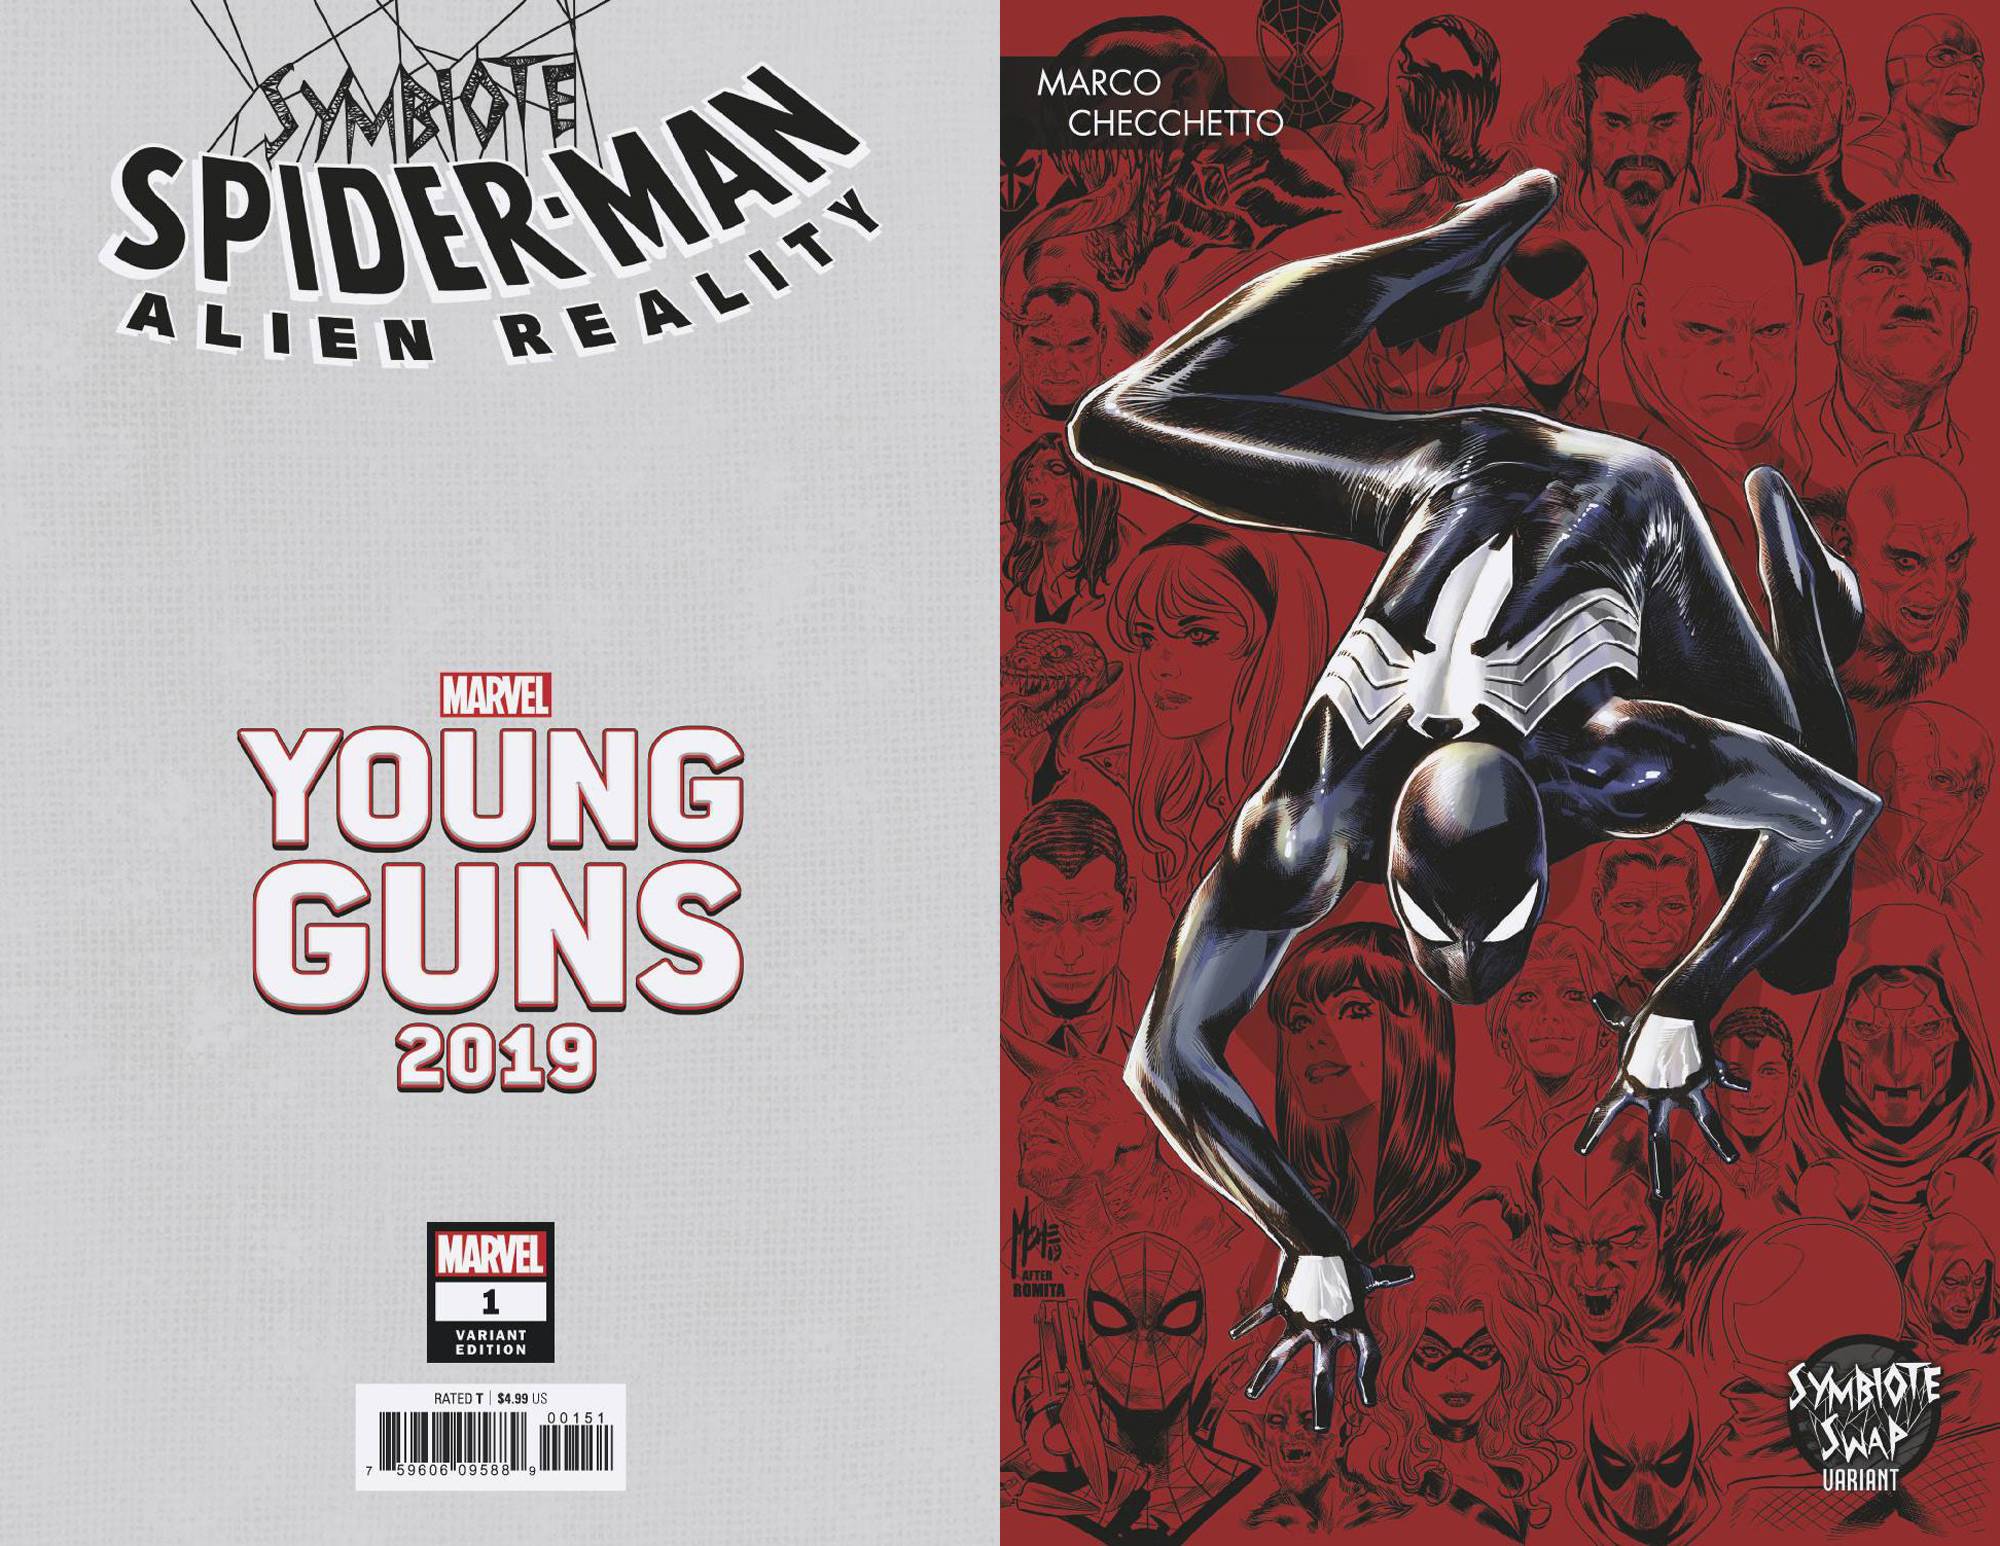 Symbiote Spider-Man Alien Reality #1 Checchetto Young Guns Variant (Of 5)